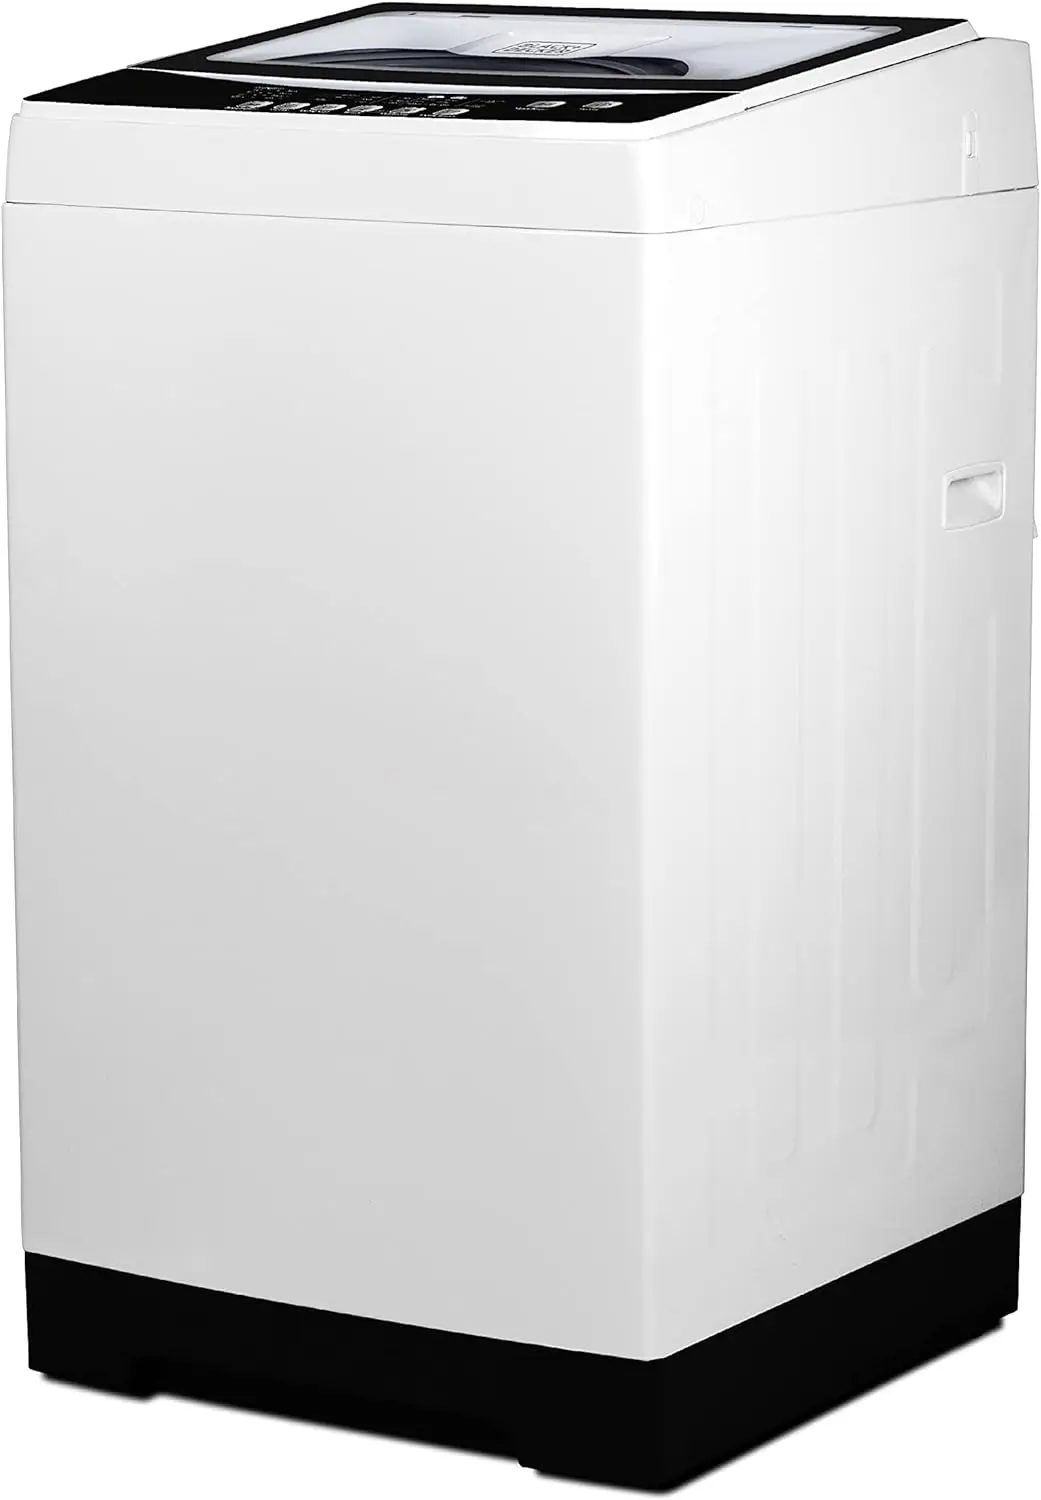 Small Portable Washer,Washing Machine for Household Use,Portable Washer 3.0 - $682.88